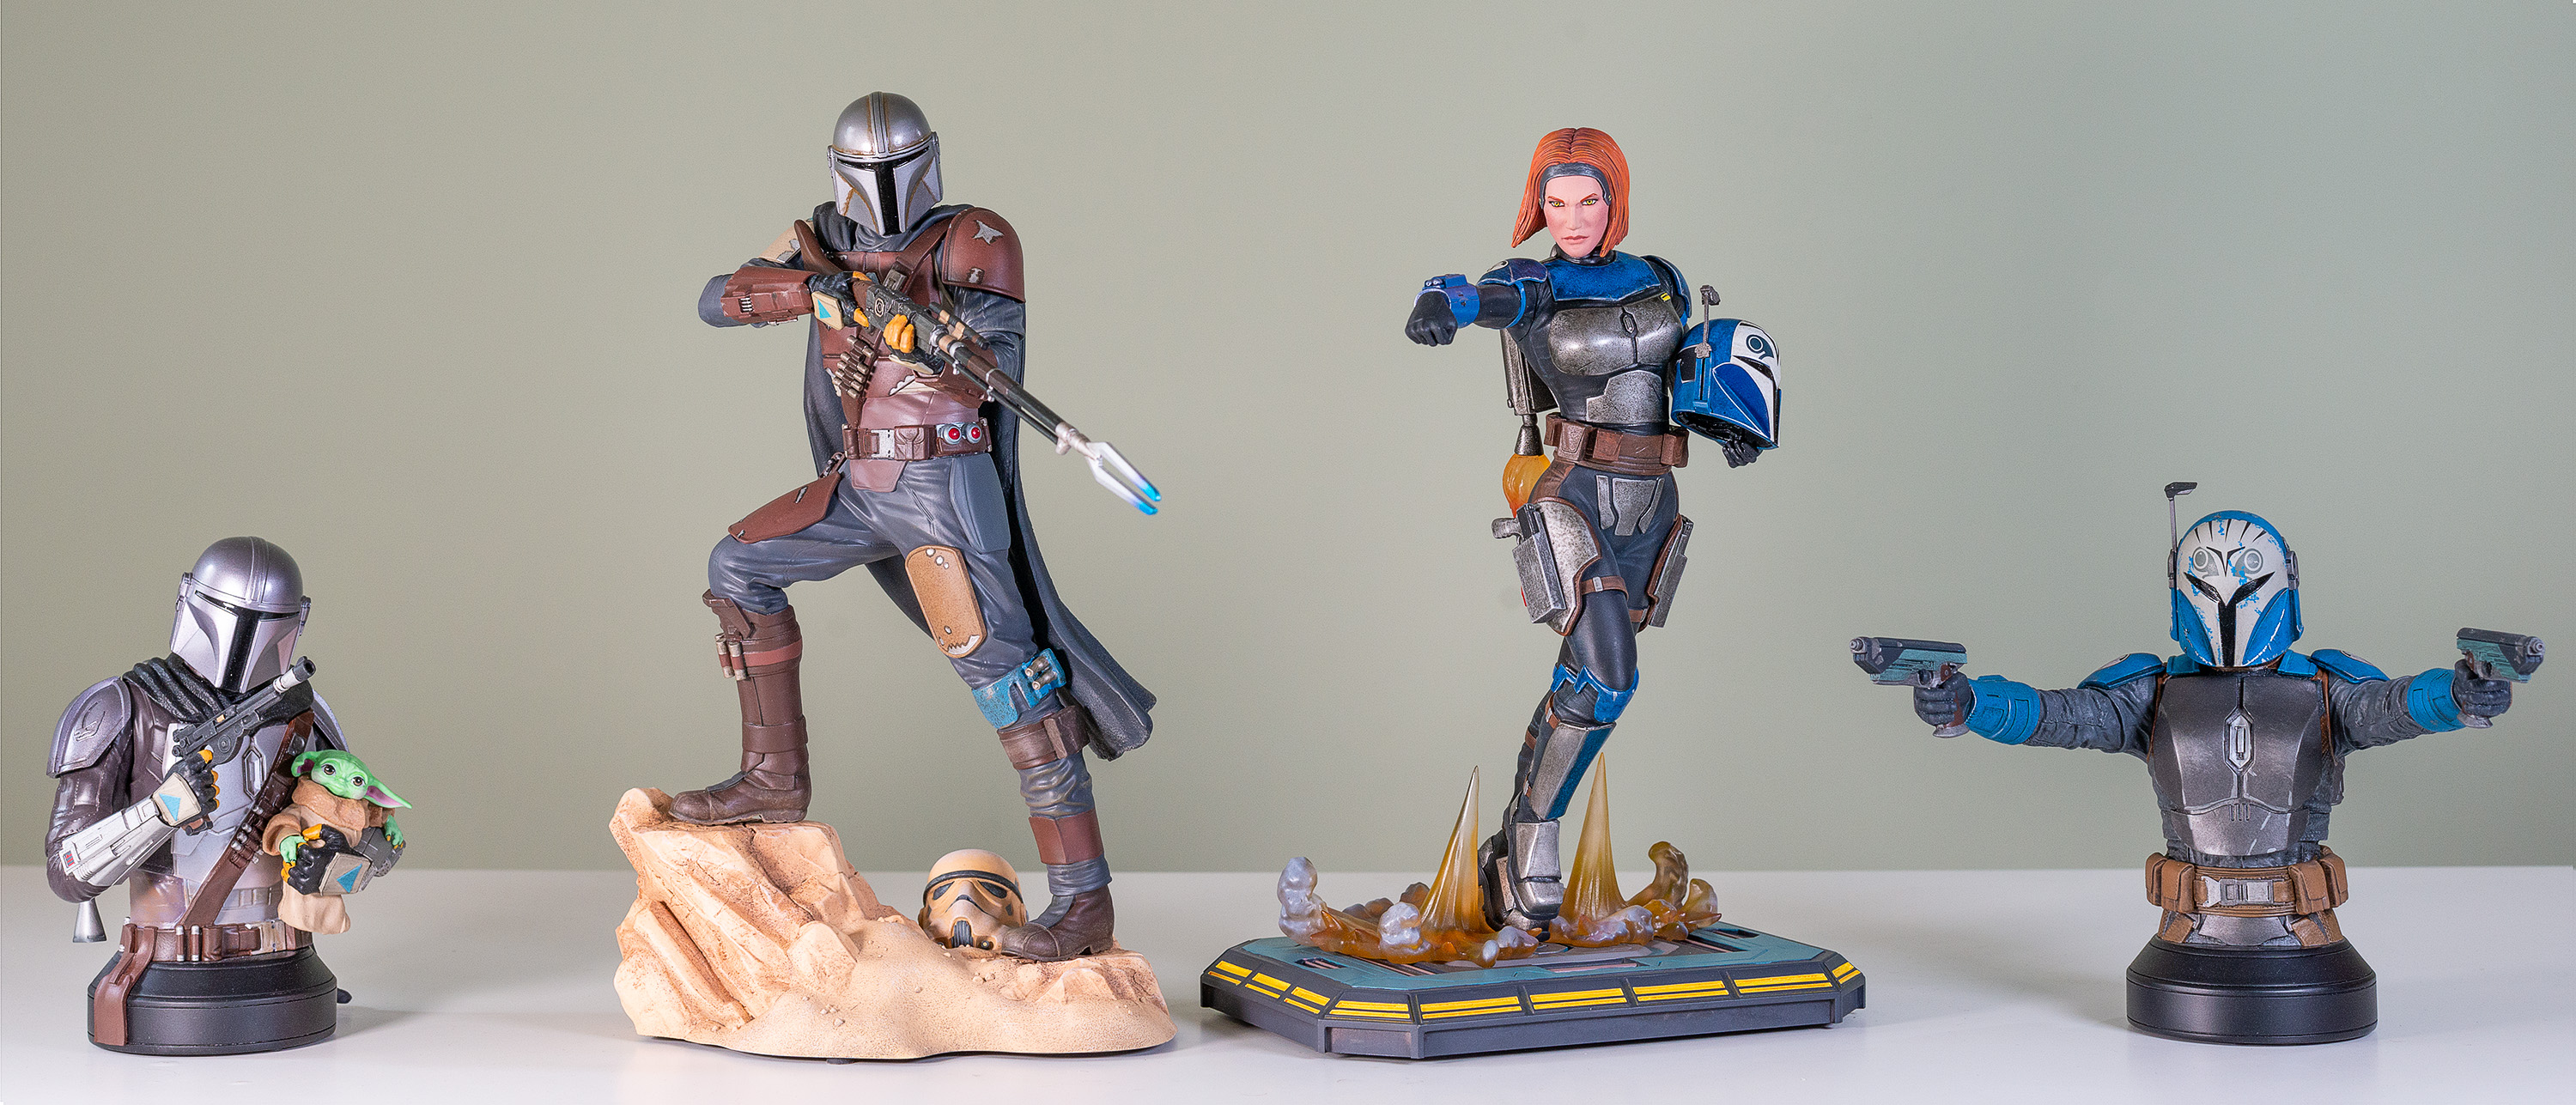 Star Wars Gentle Giant mini busts and statues review